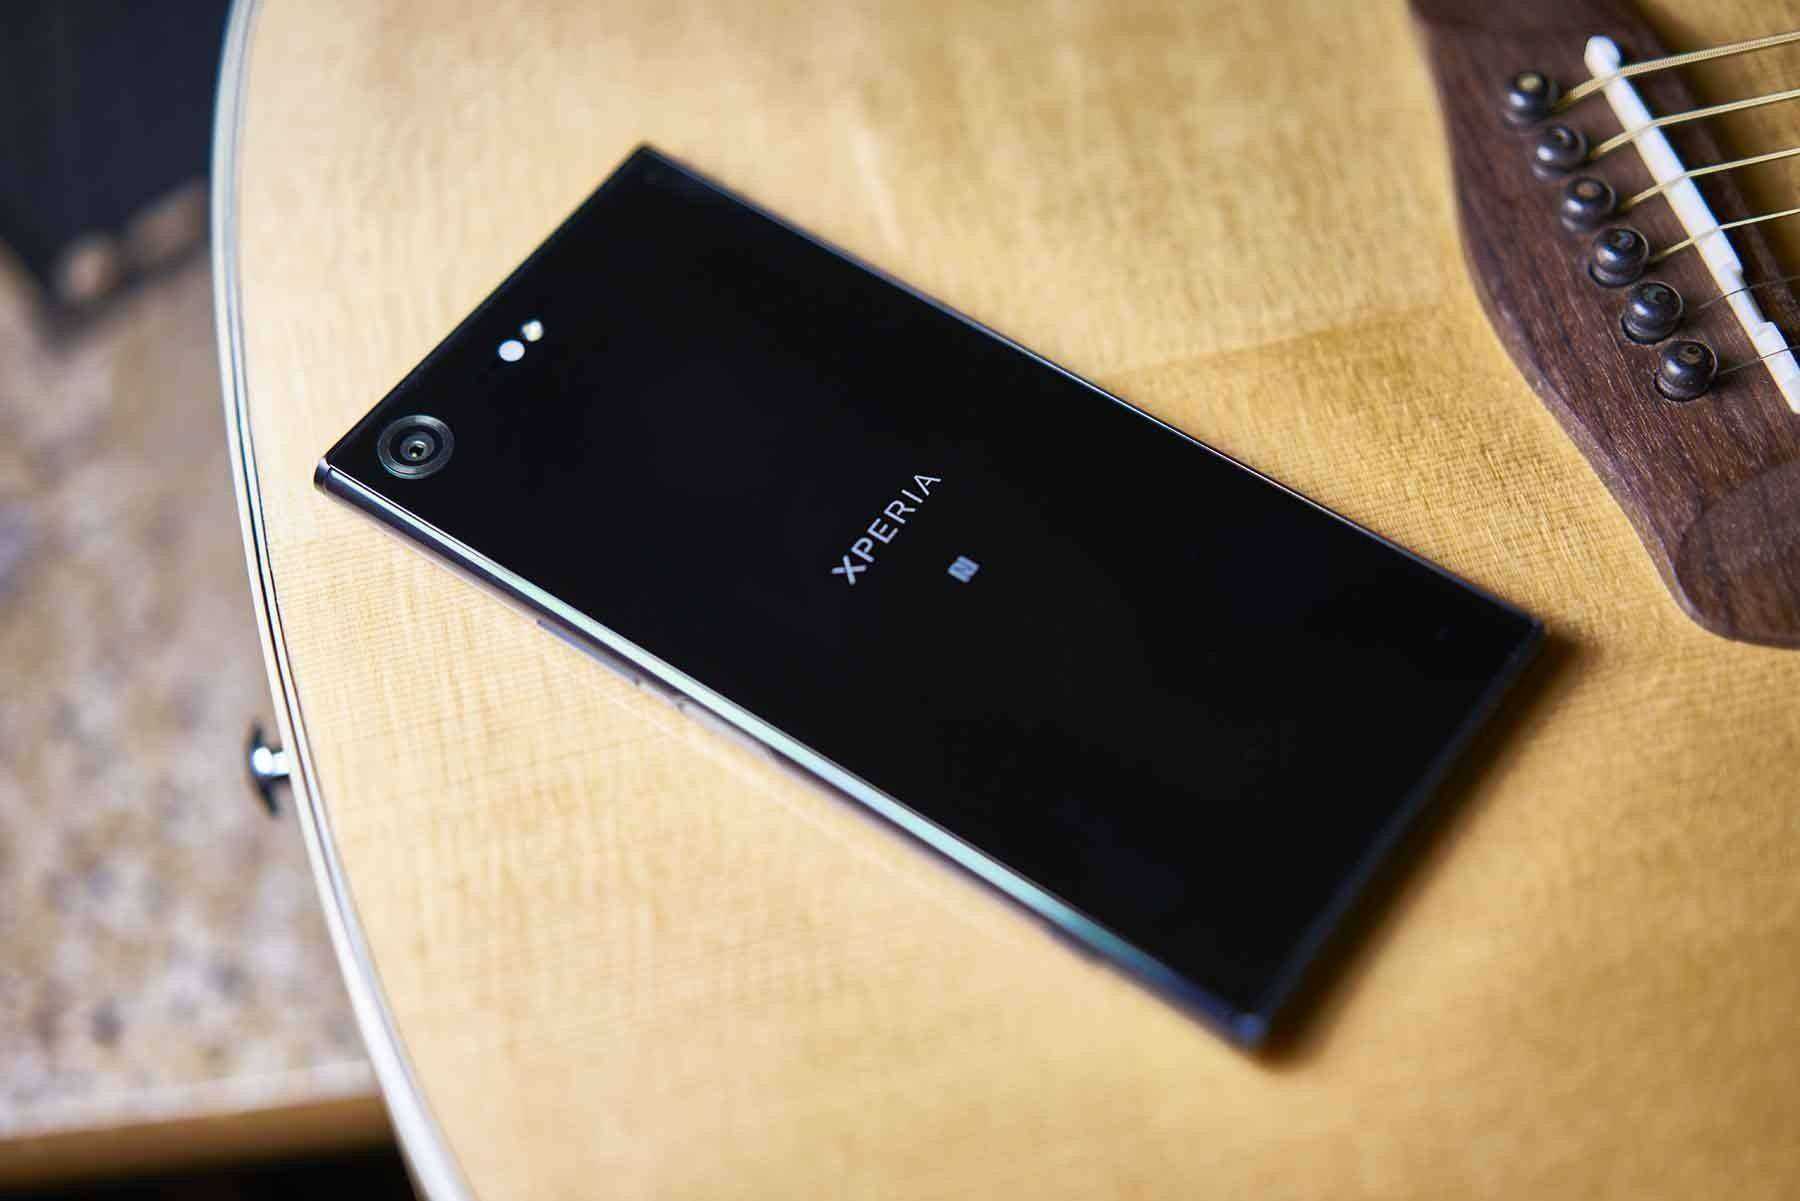 Xperia XZ Premium is a Total Game Changer